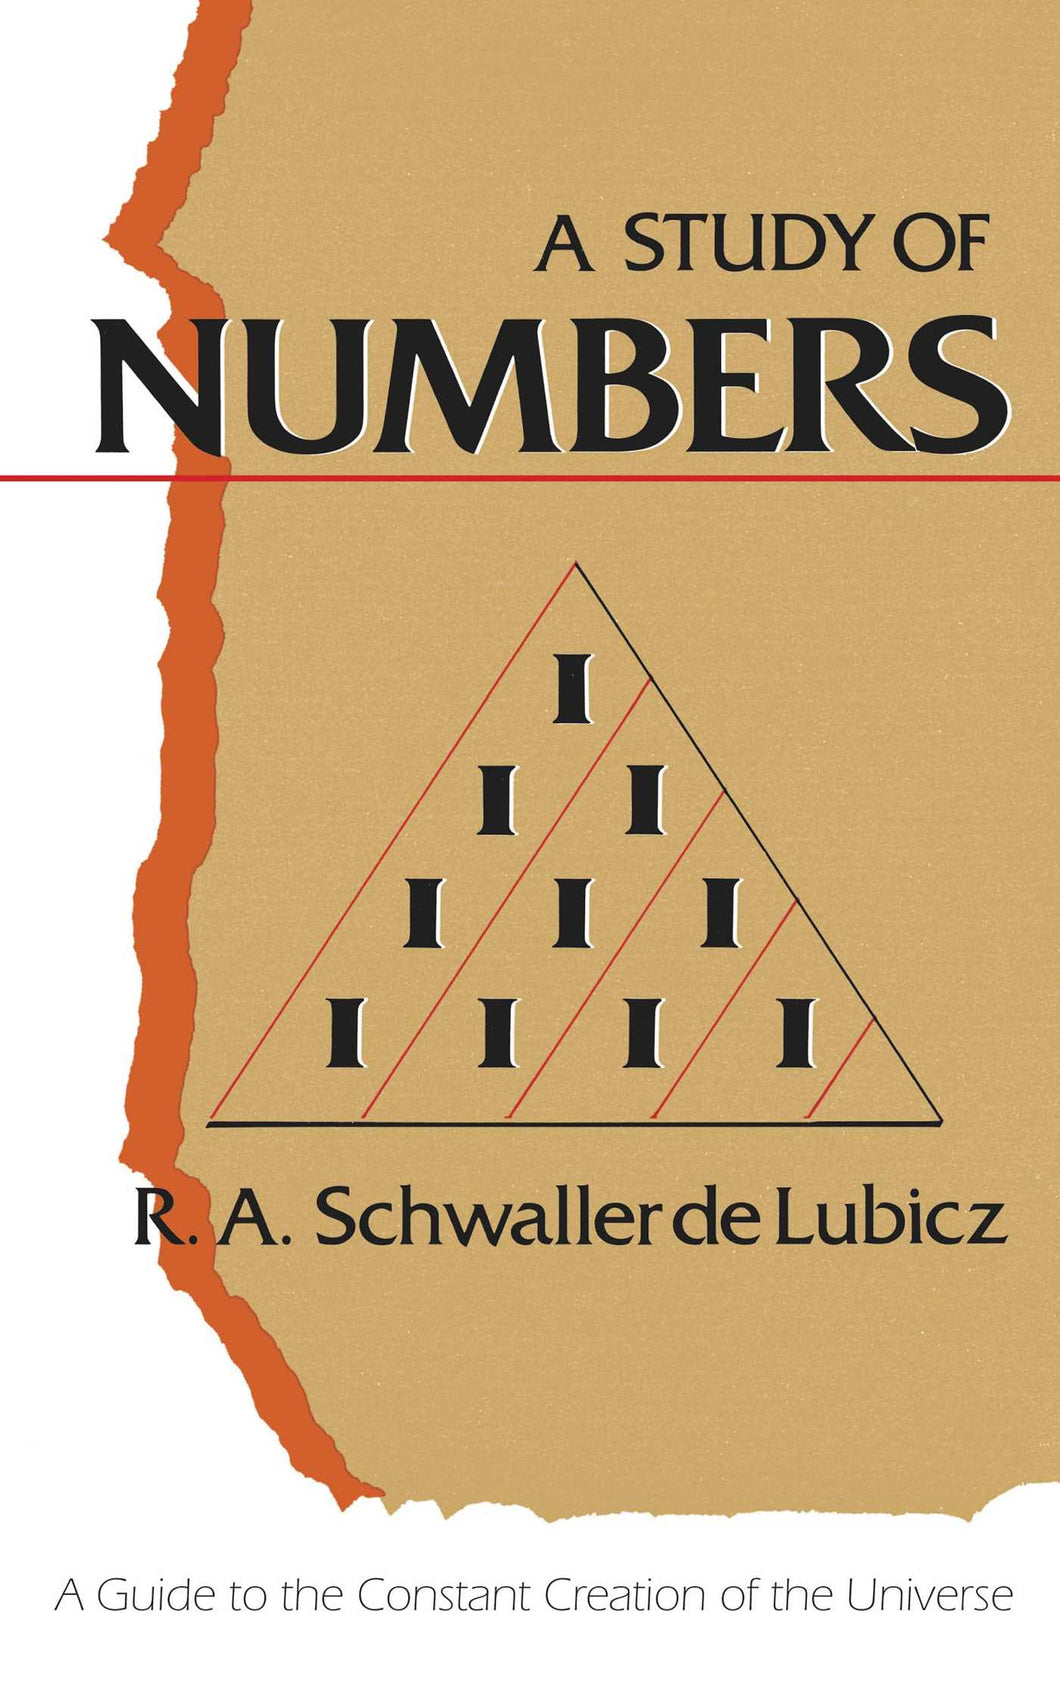 A Study of Numbers